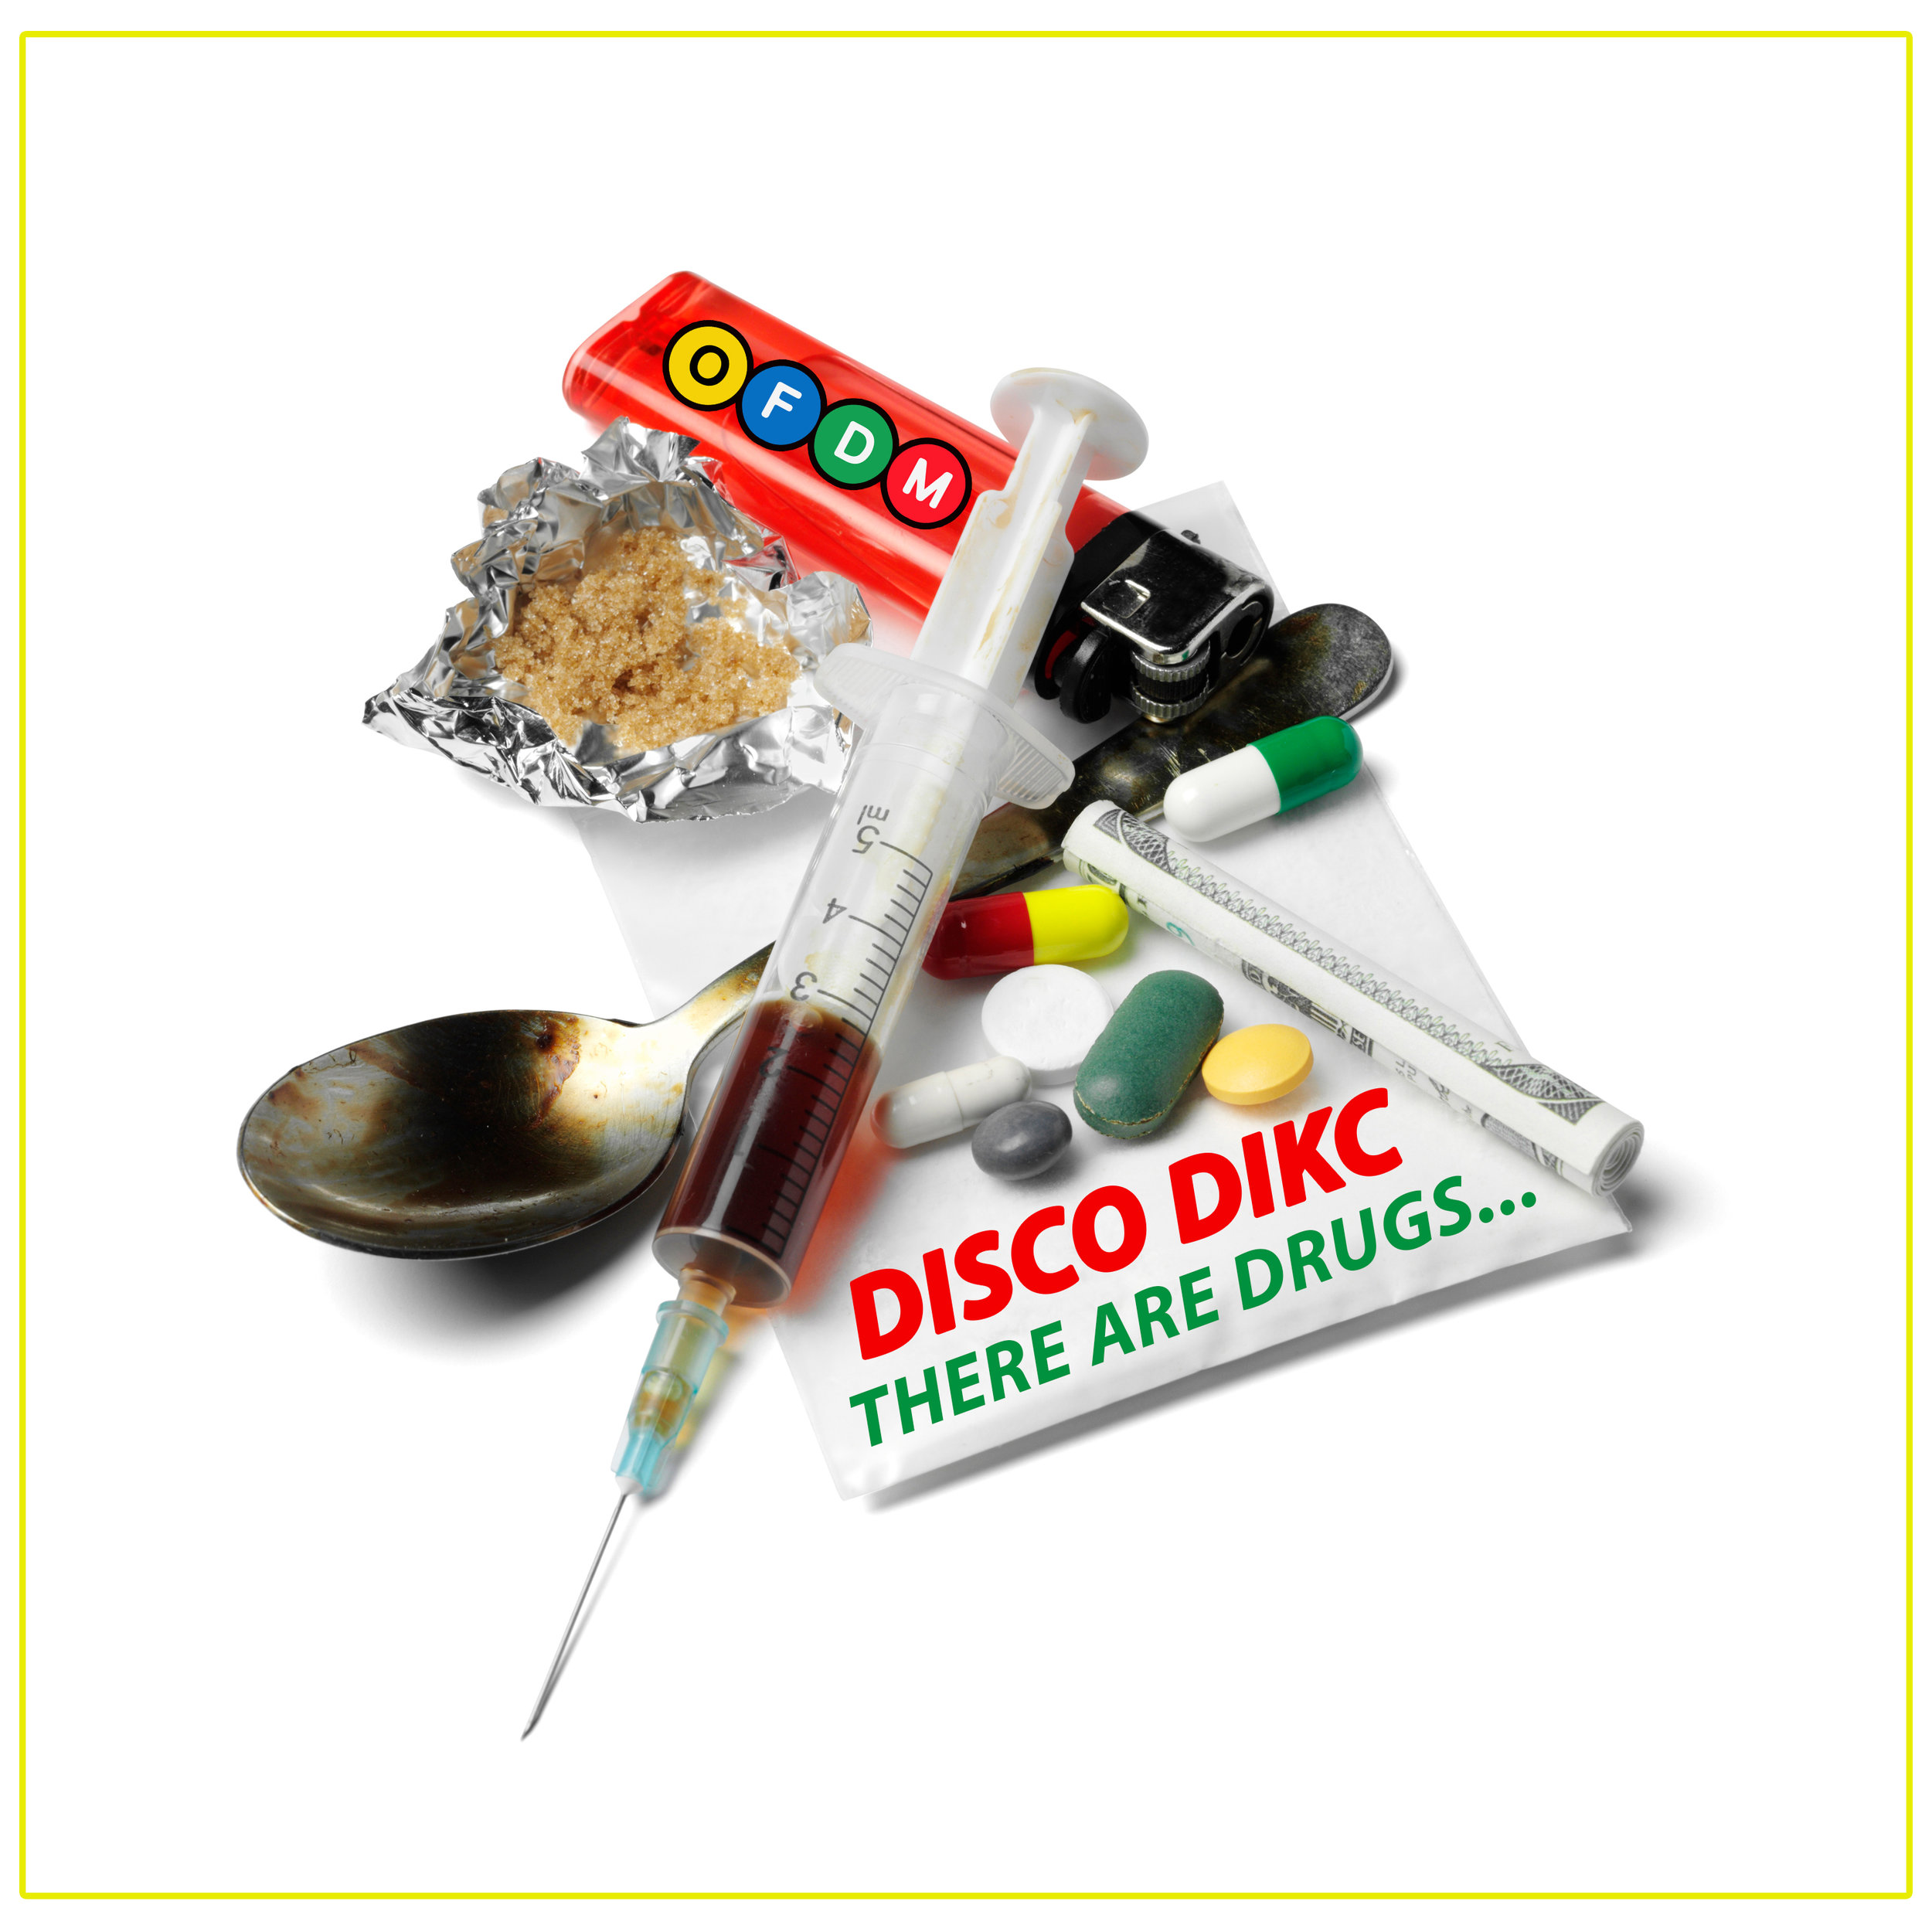 [OFDM023] DISCO DIKC - There Are Drugs.jpg